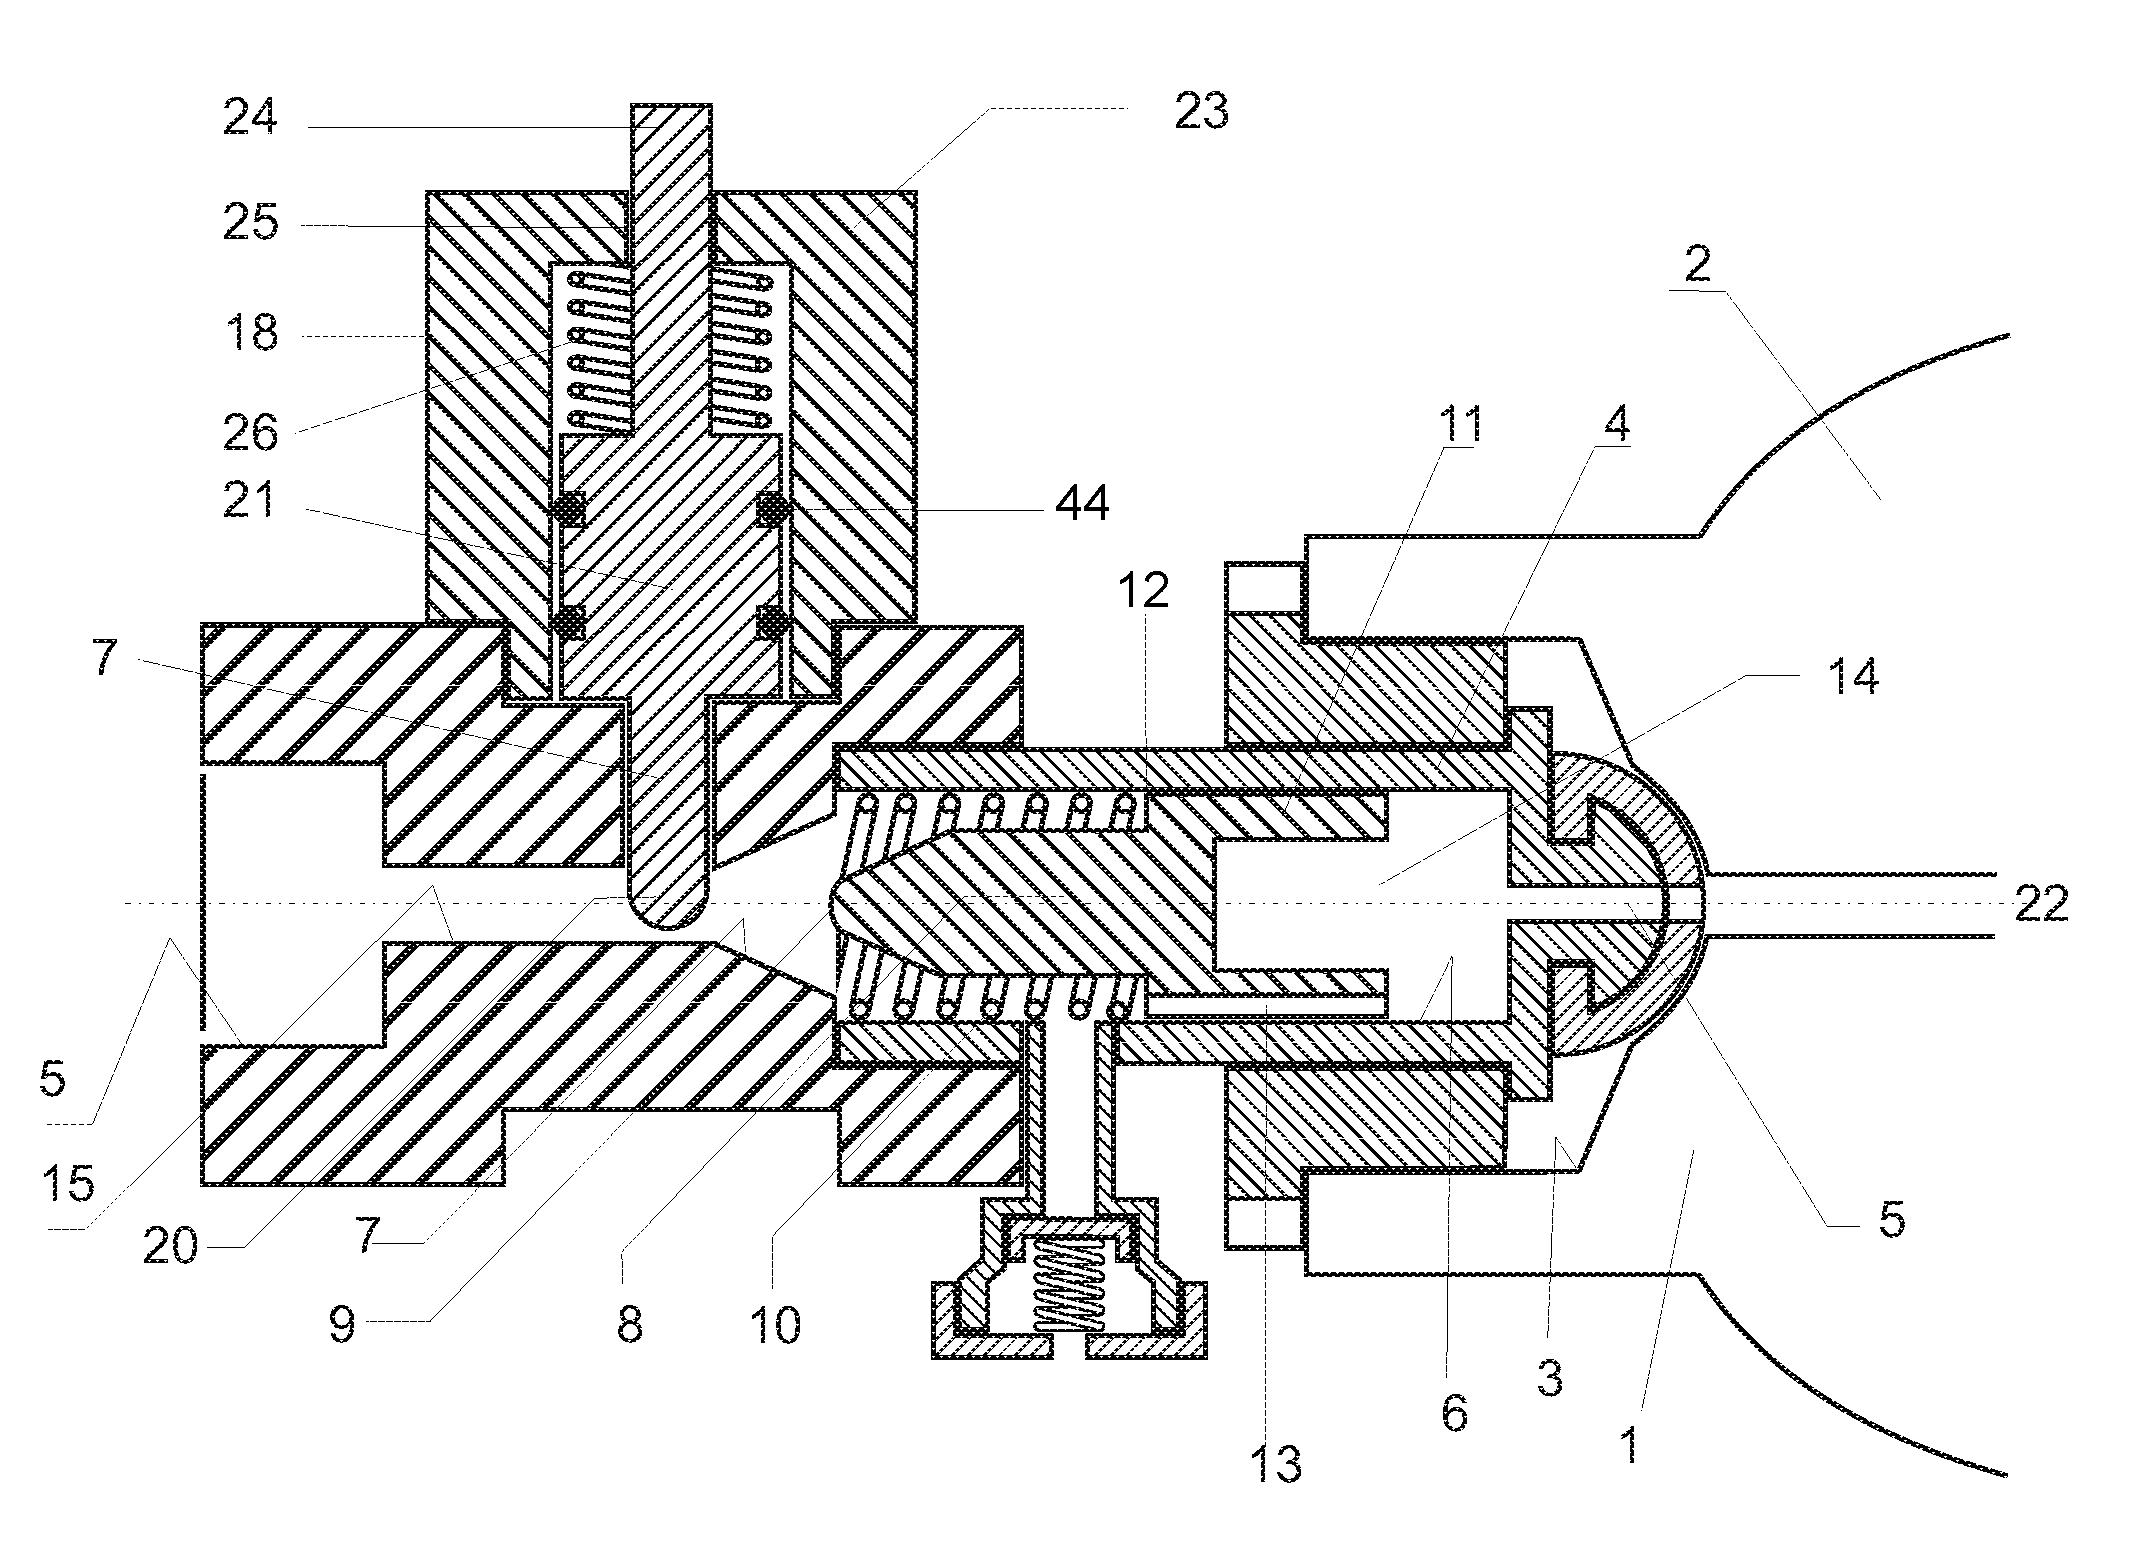 Safety gas valve capable to attain a blocking condition when subjected to a flow in excess of its nominal working conditions